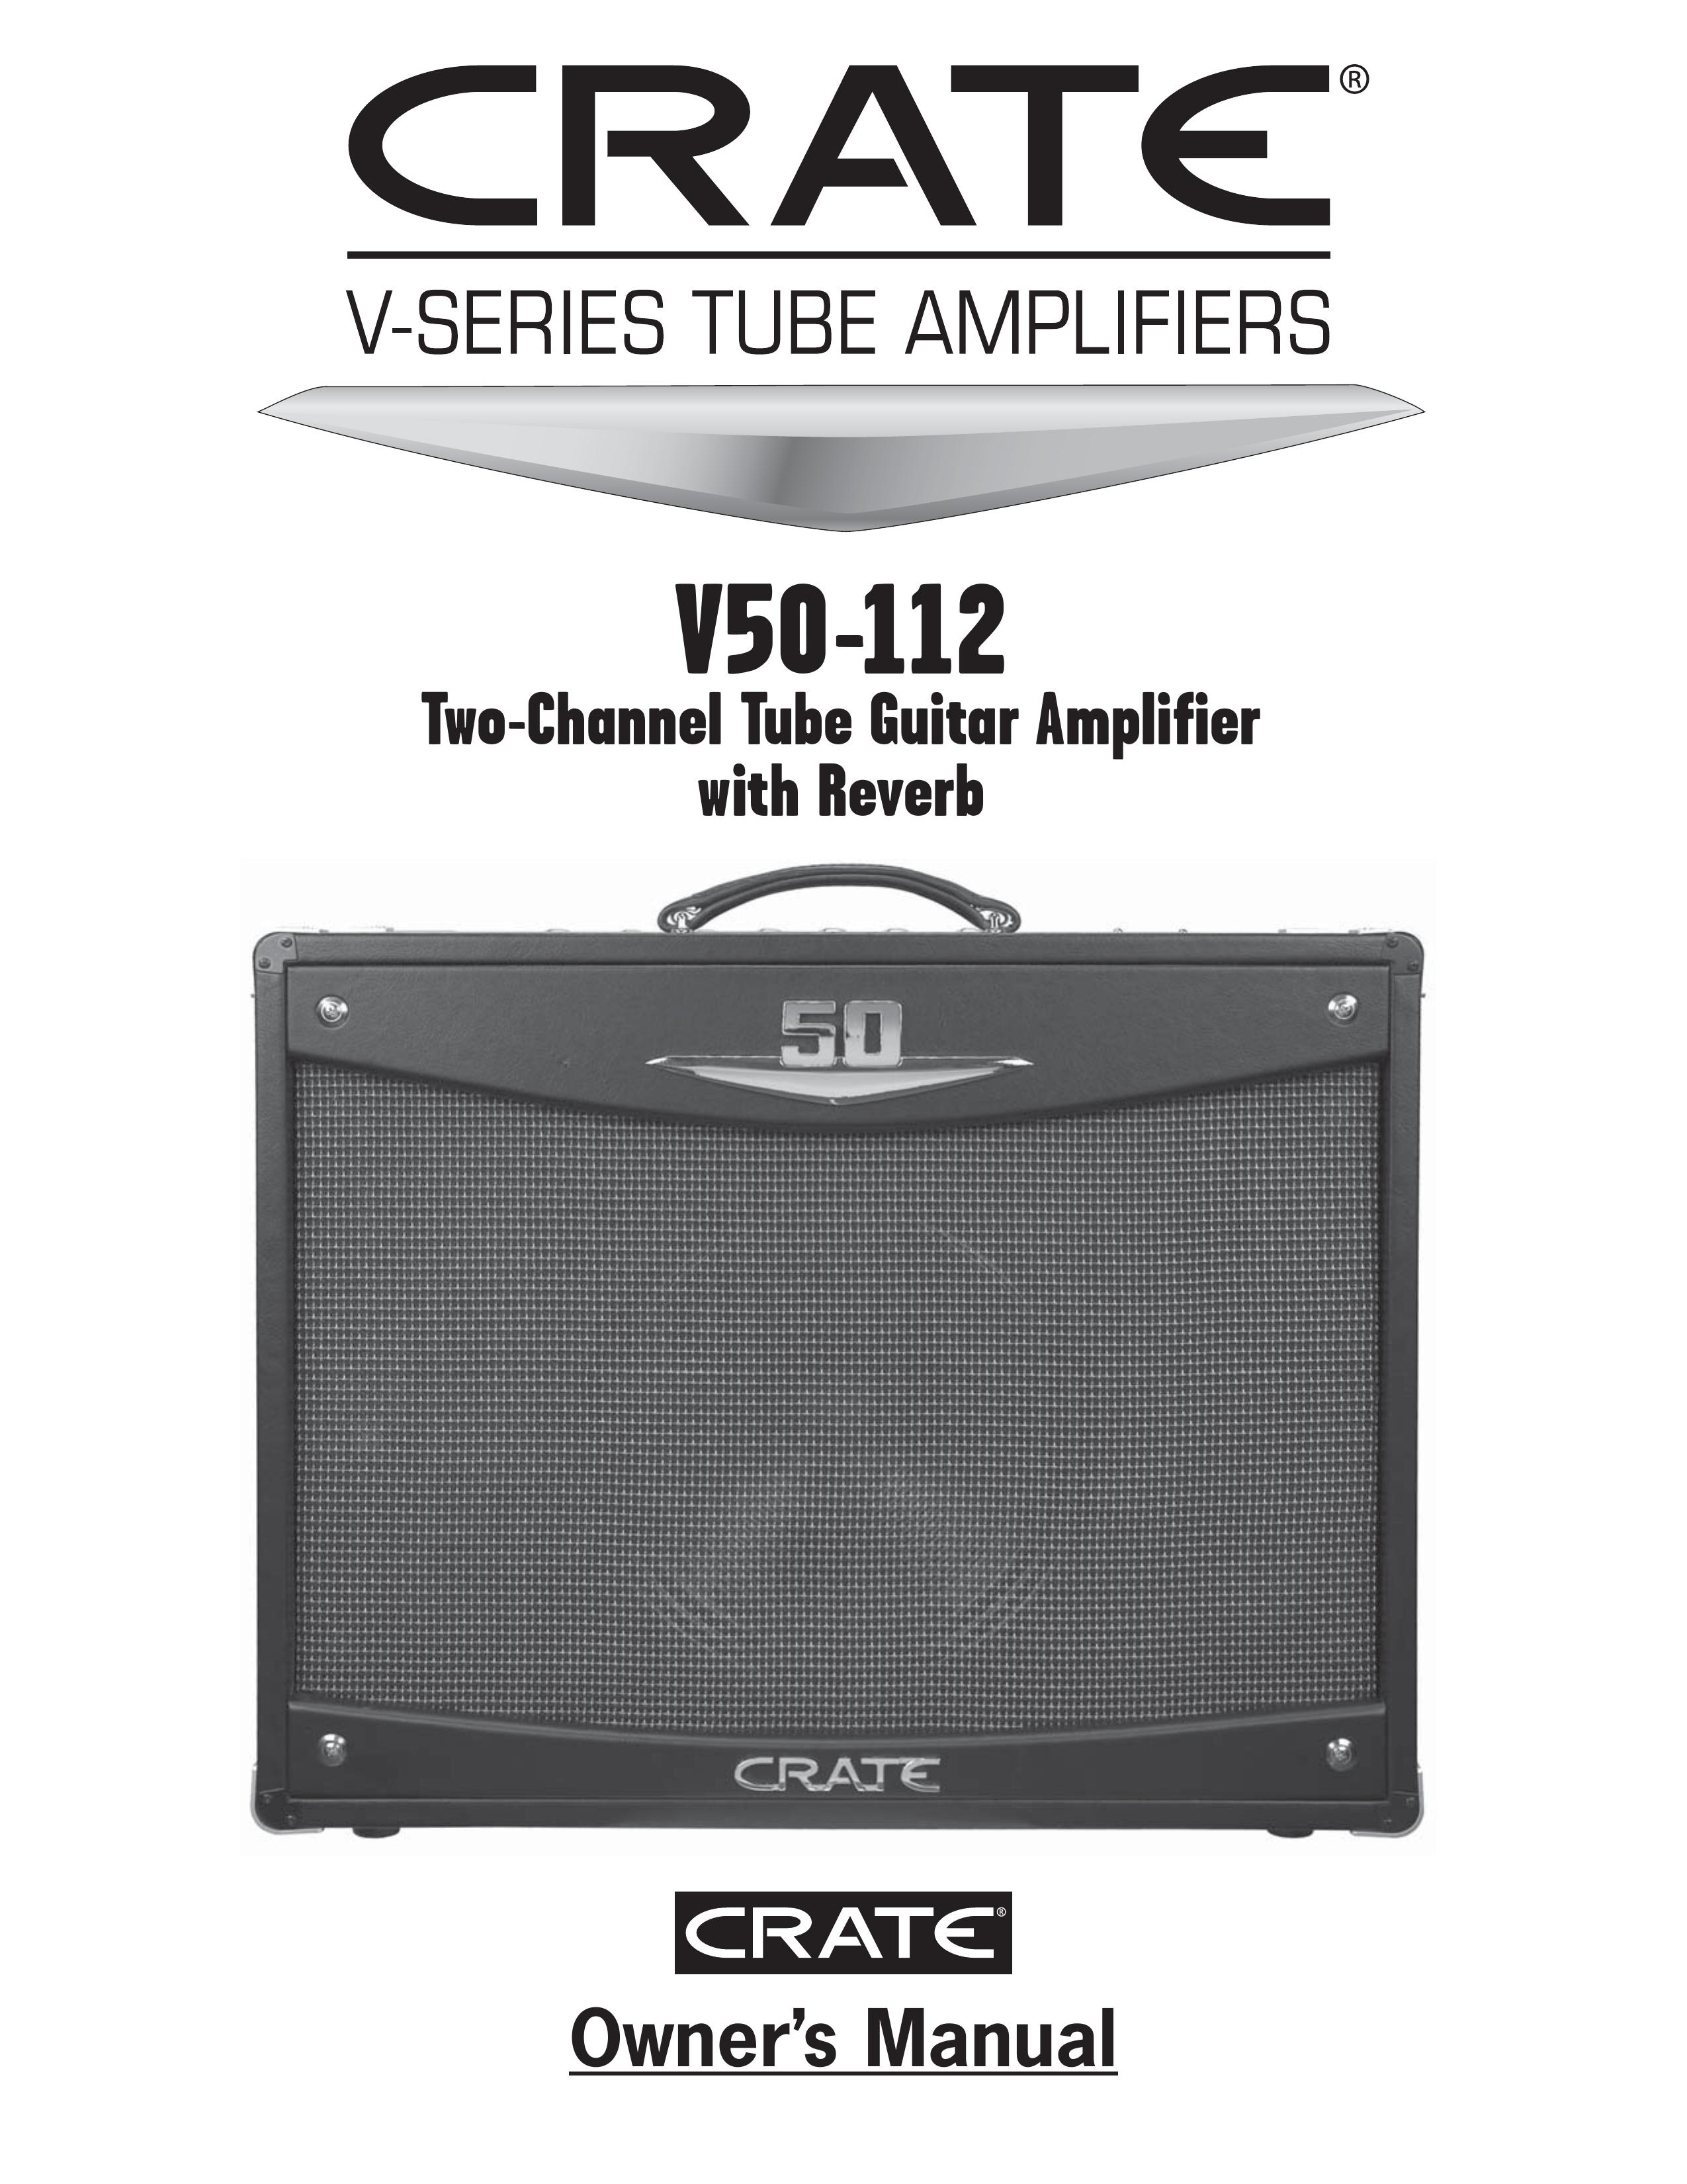 Crate Amplifiers V50-112 Musical Instrument User Manual